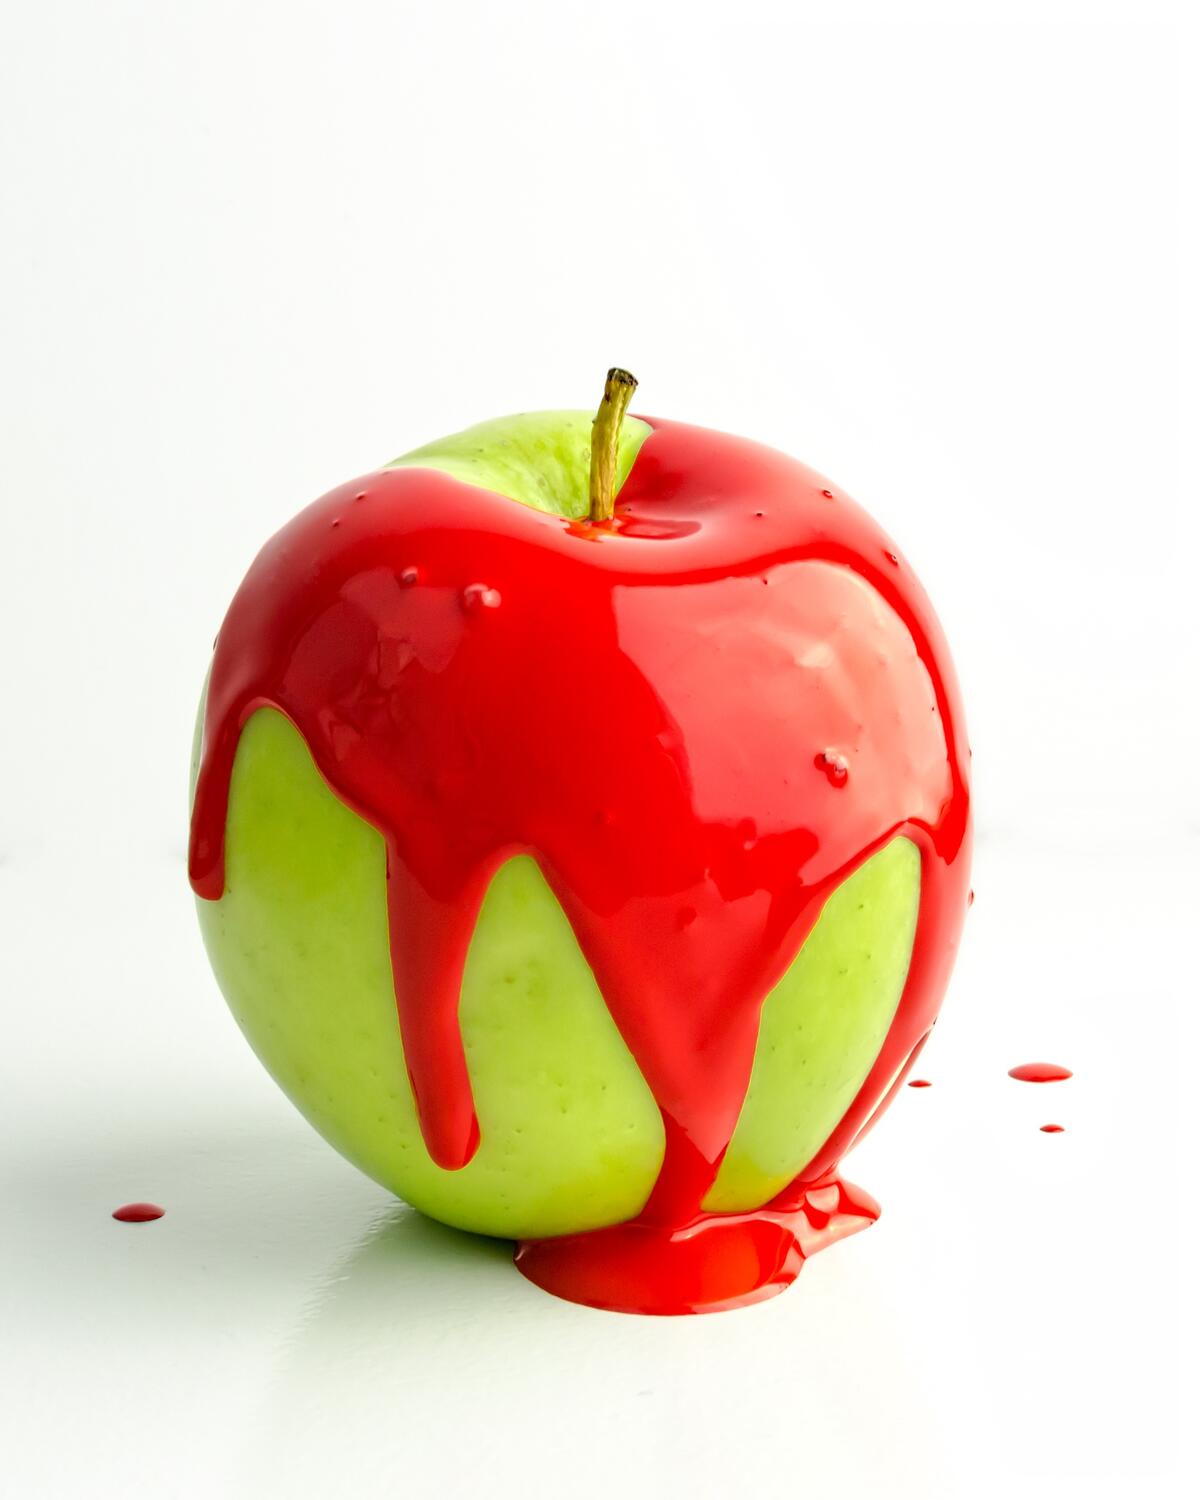 Green apple covered with red glaze